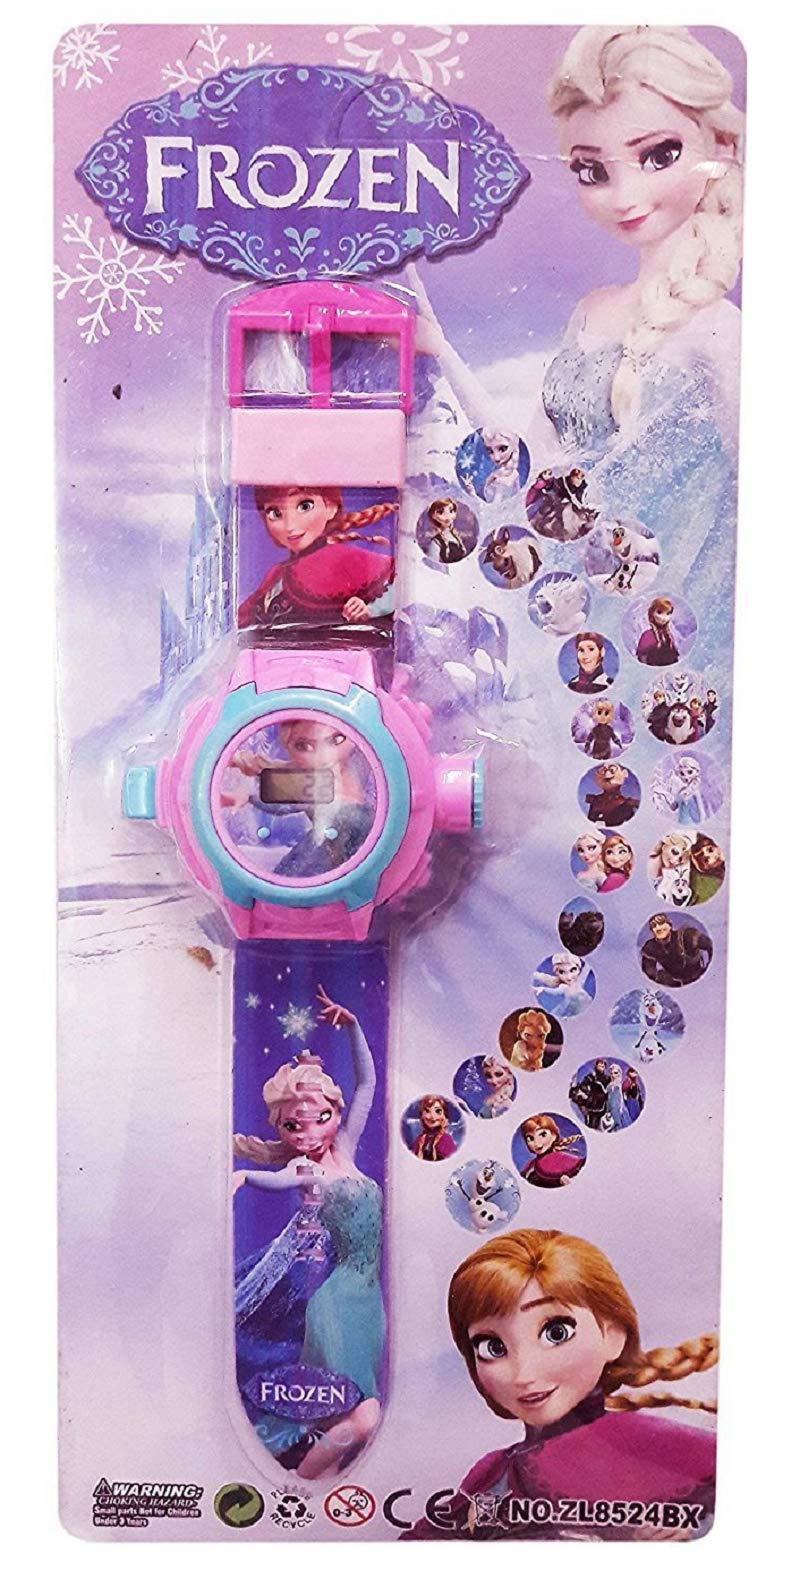 Frozen - 24 Images Projector Watch Digital Wrist Watch for Boys and Girls Gift X-mas Gift